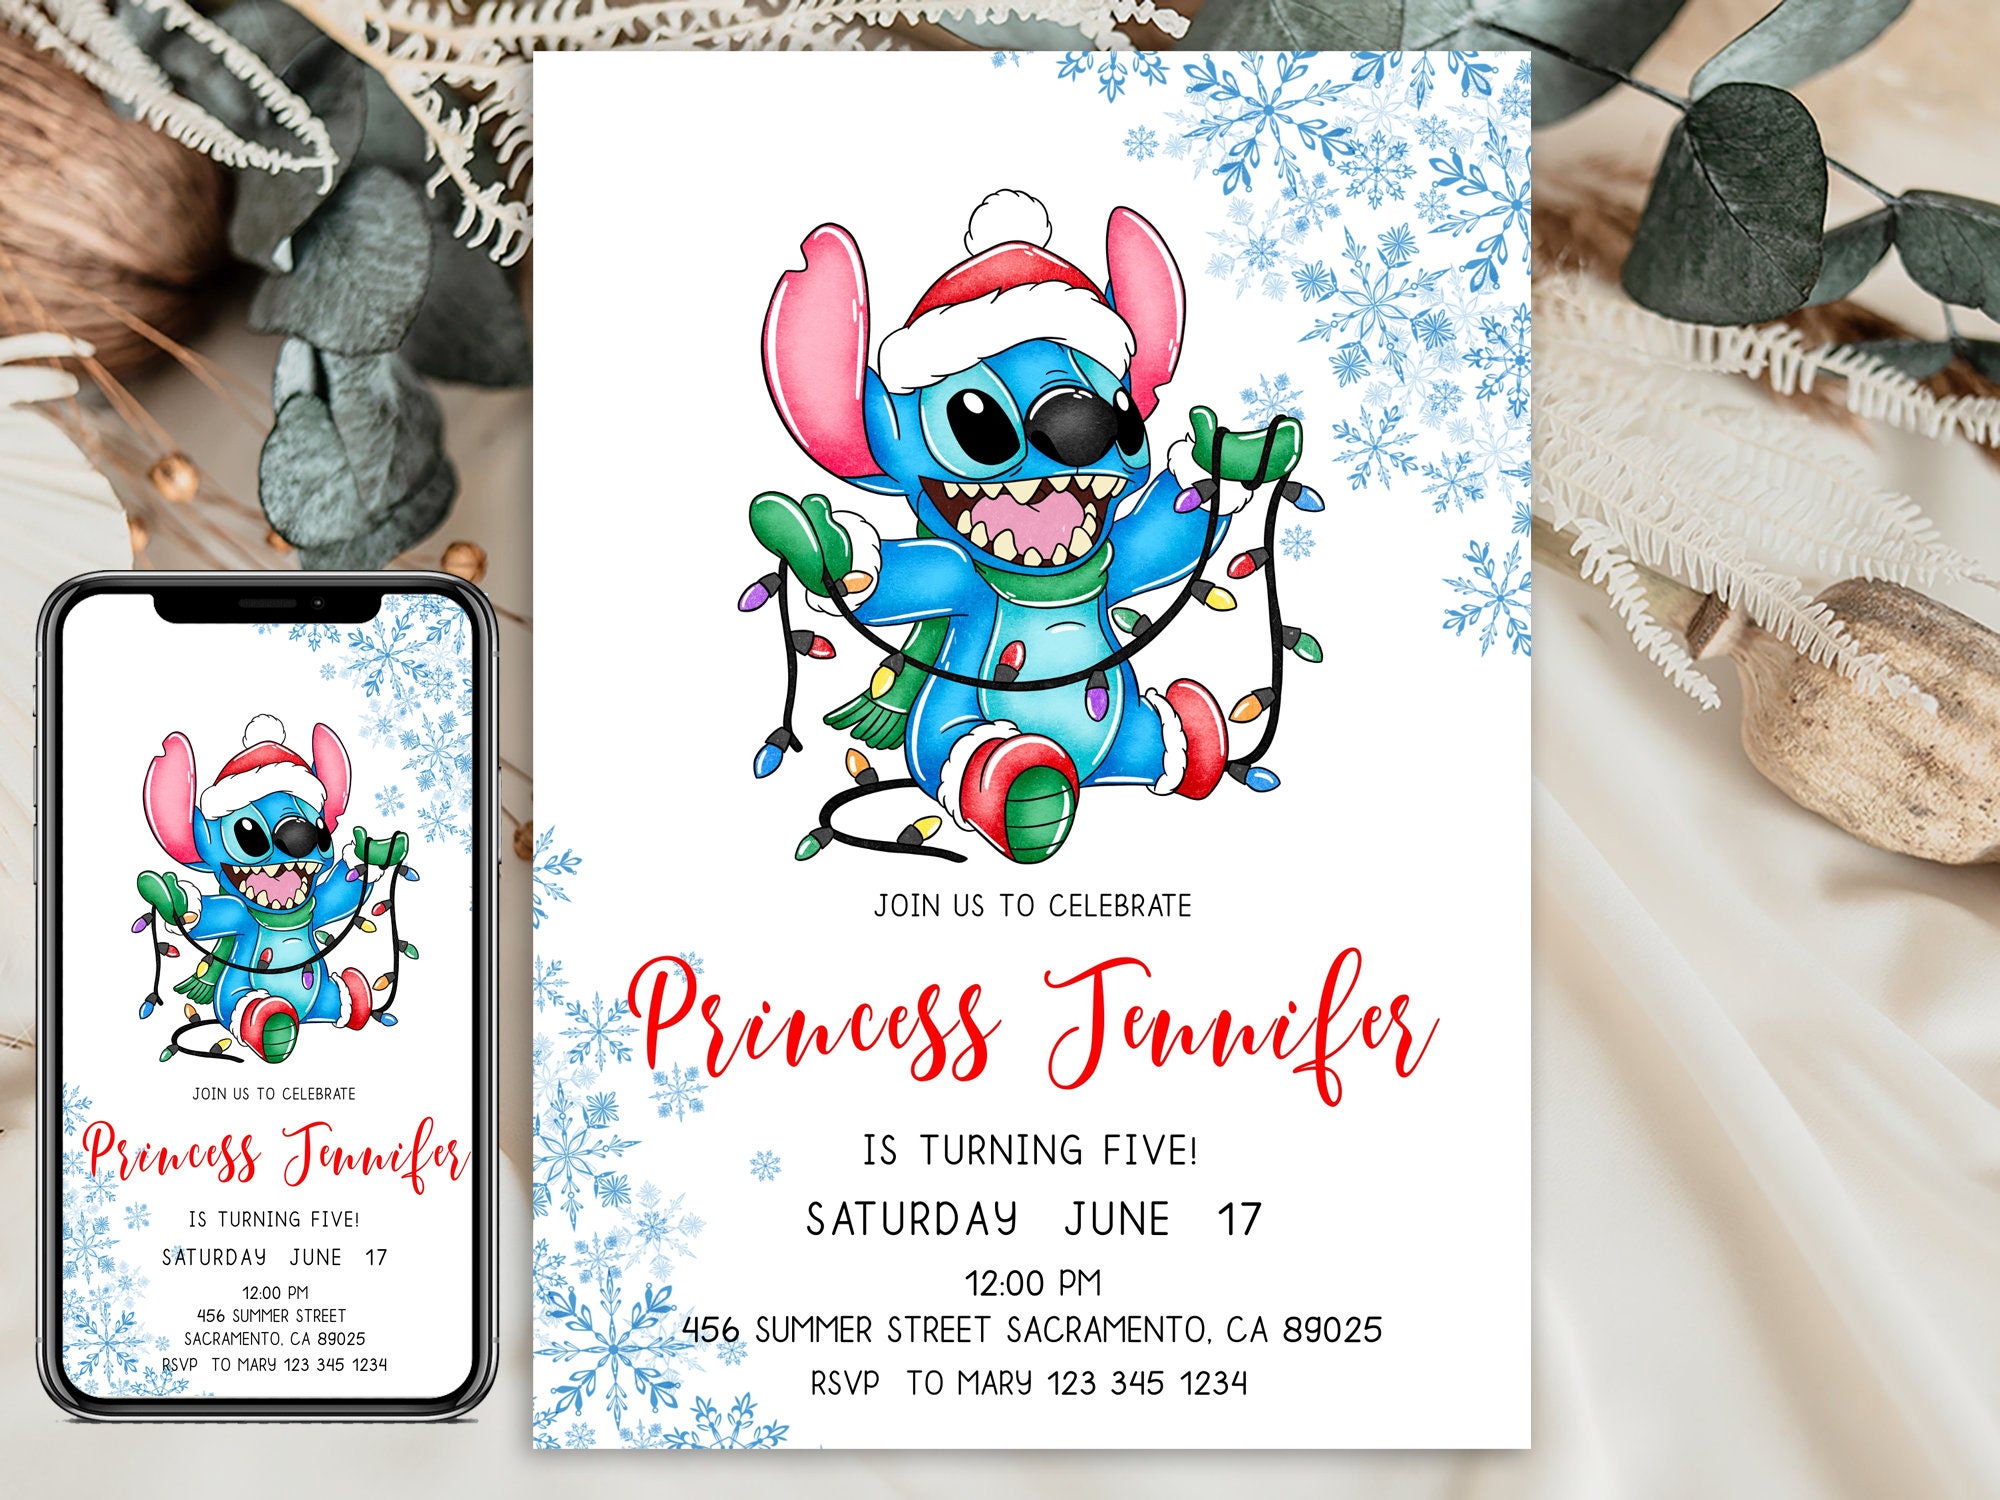 10 LILO STITCH BIRTHDAY PARTY INVITATIONS WITH ENVELOPES - 250gsm